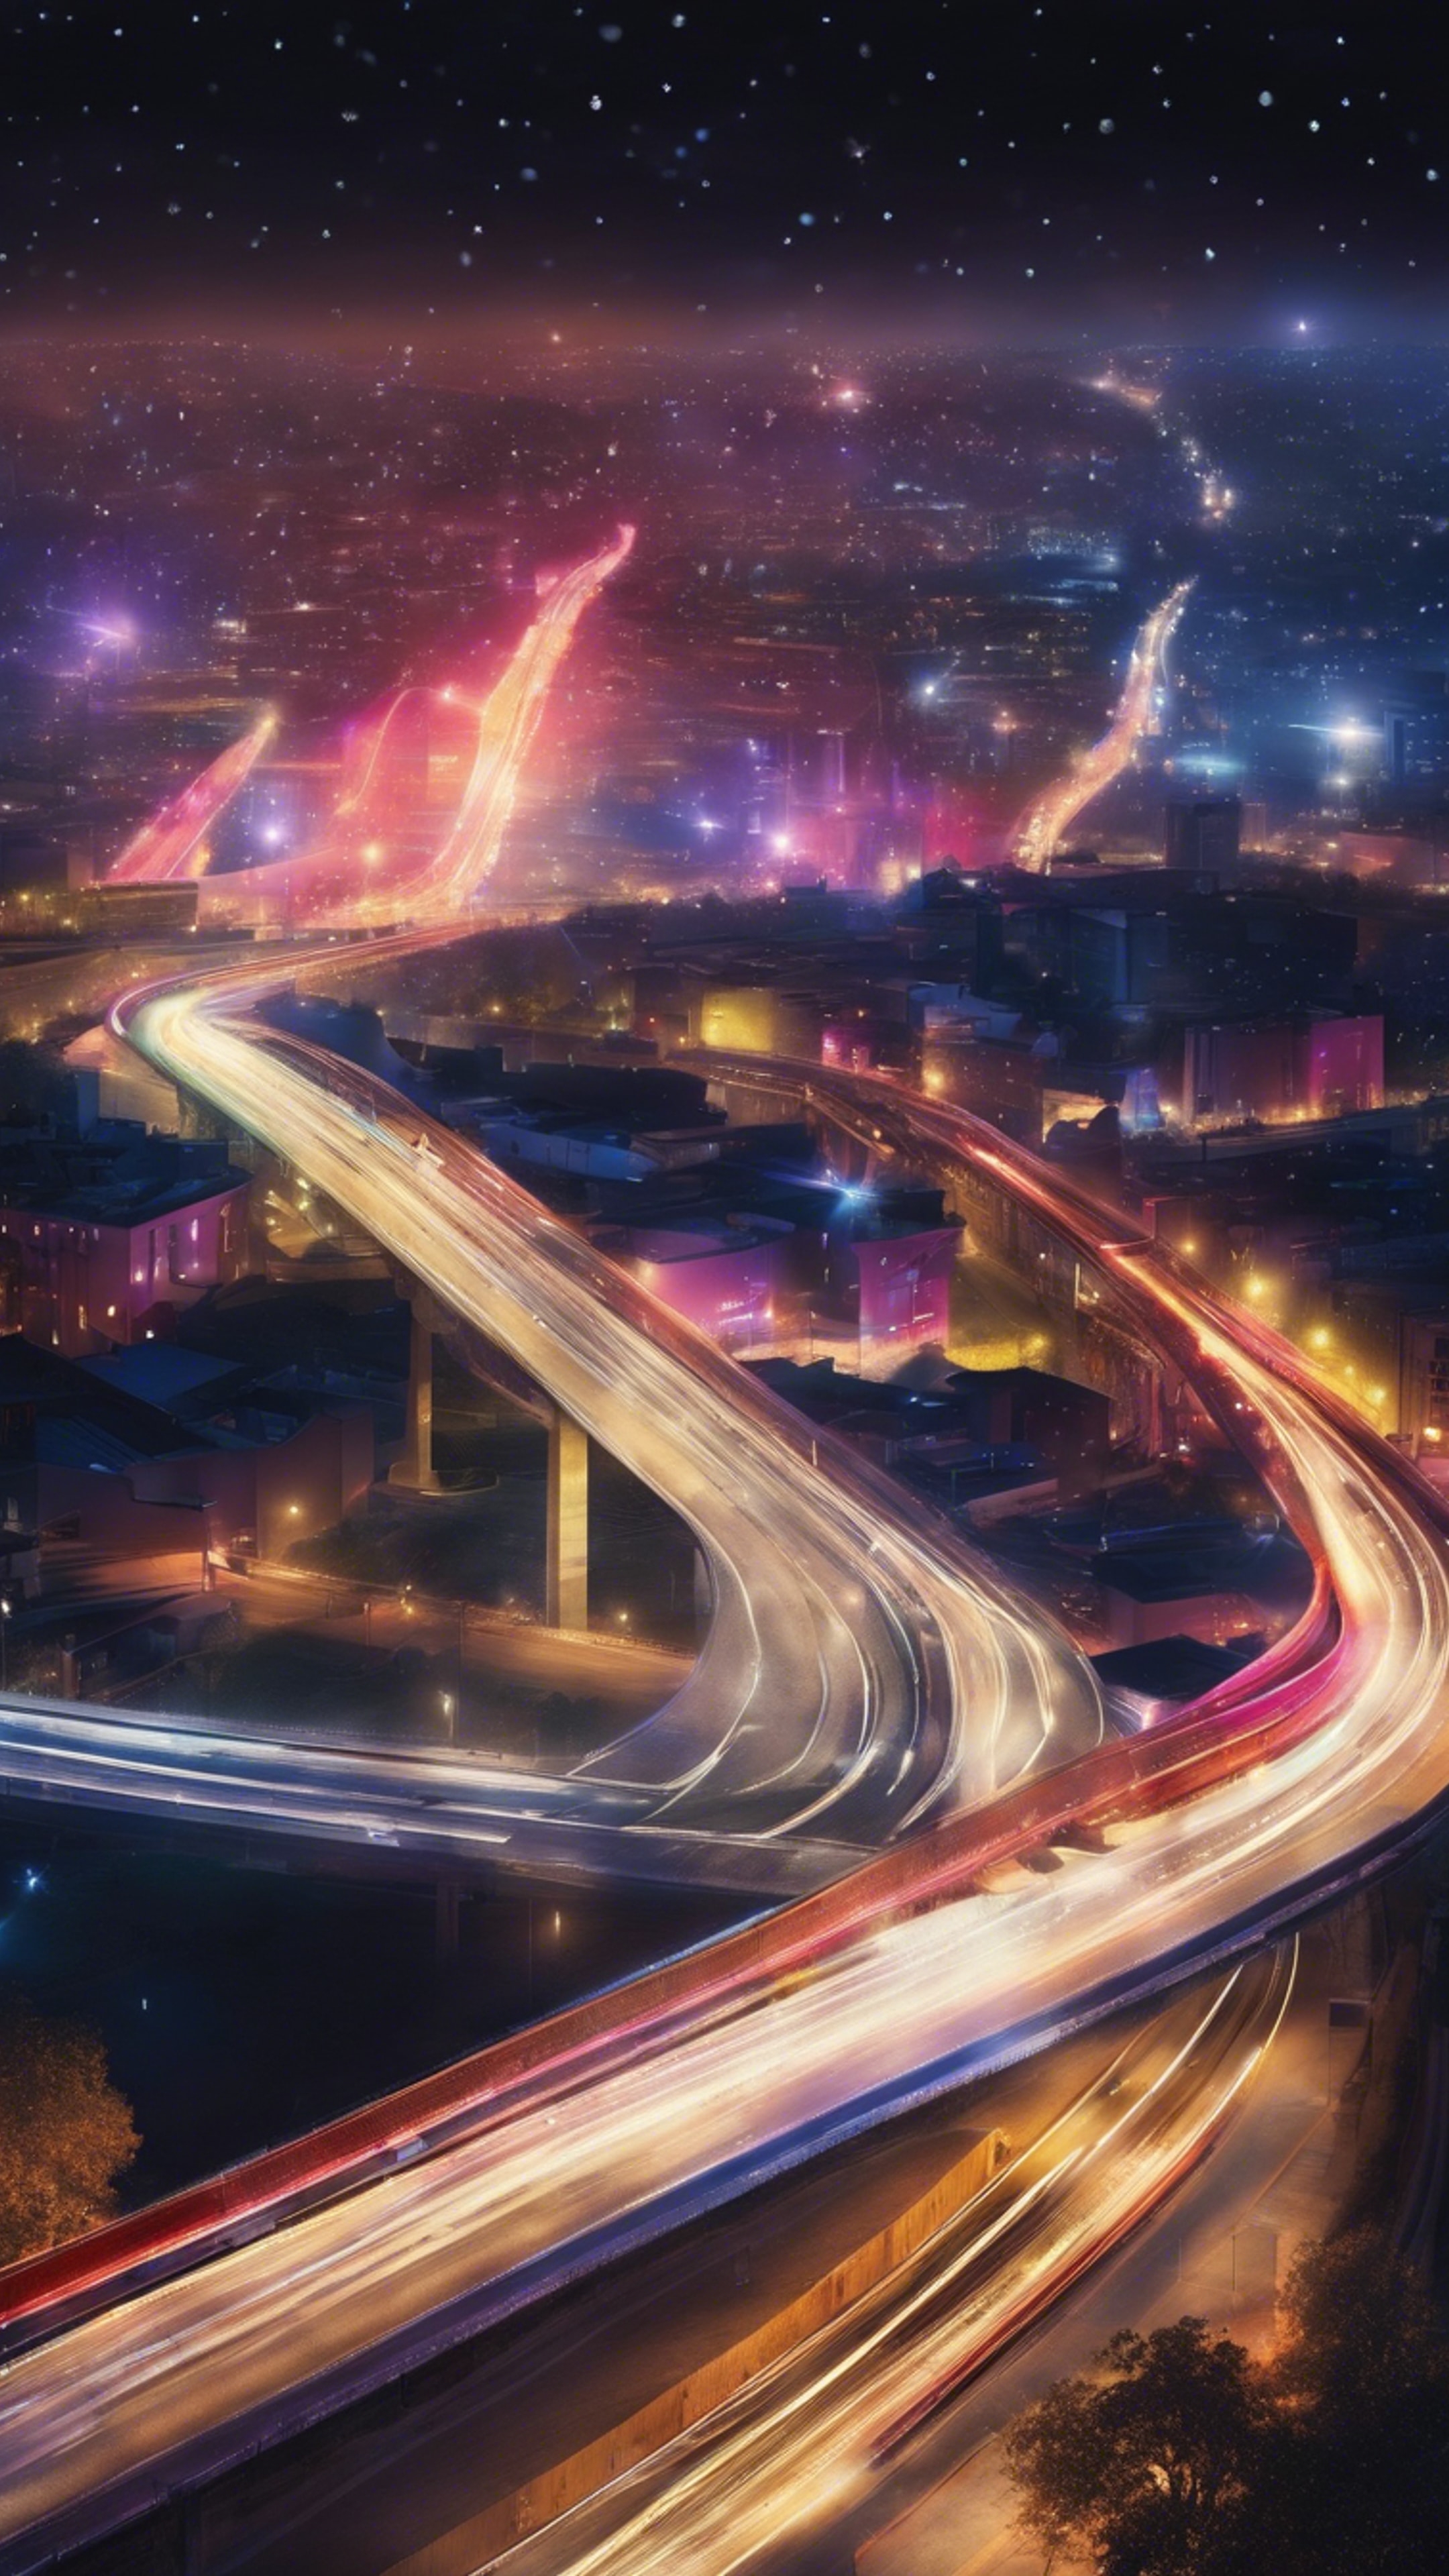 A lustrous highway painting a ribbon of light through the city under the vivid colors of a nocturnal sky. Hintergrund[7f6125f7f59b411d957d]